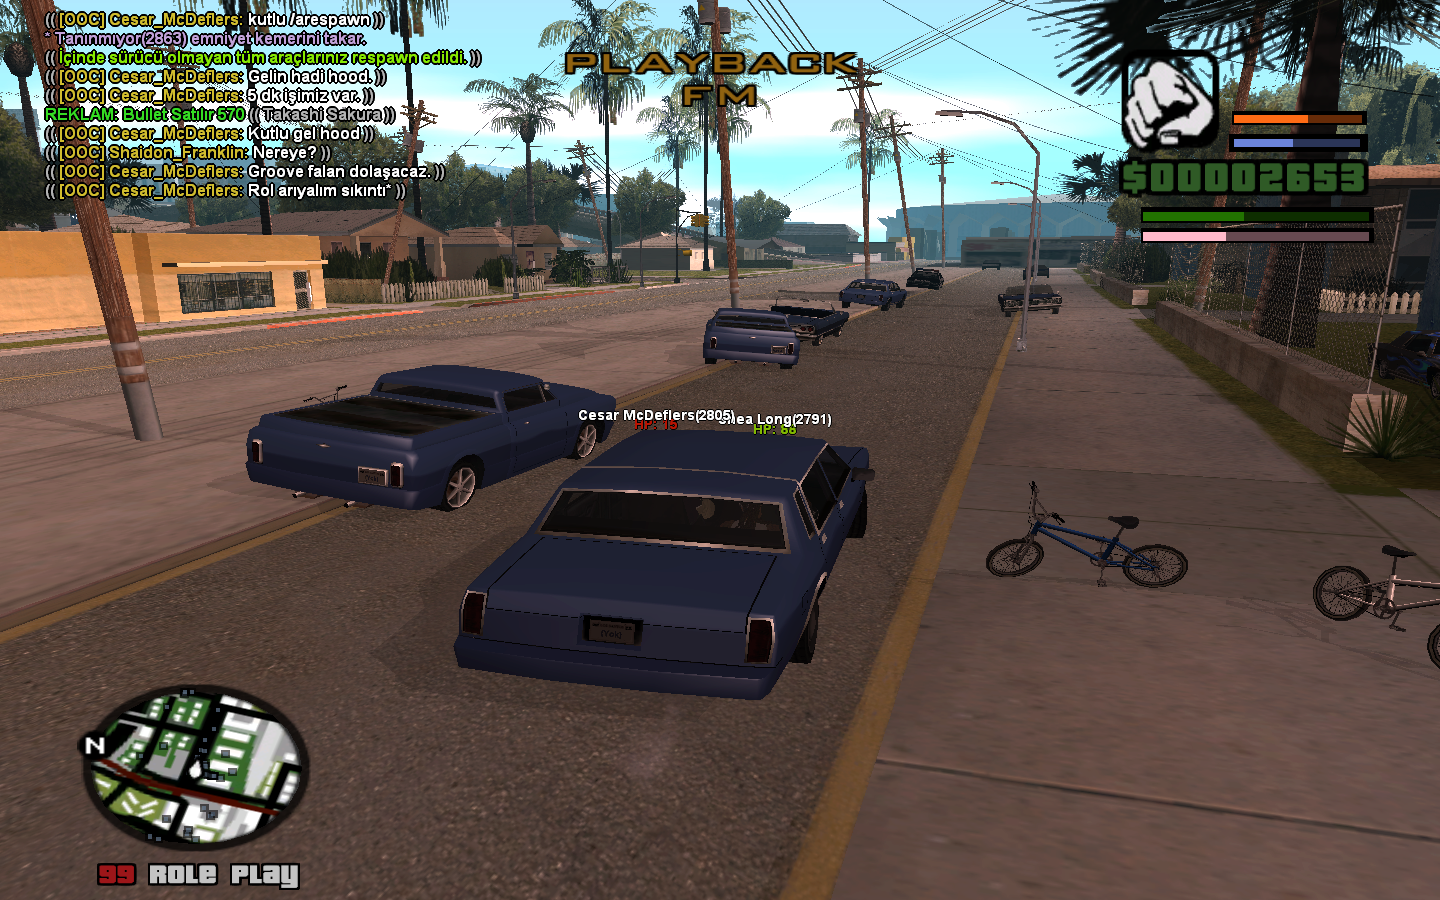 San andreas multiplayer 0.3 7